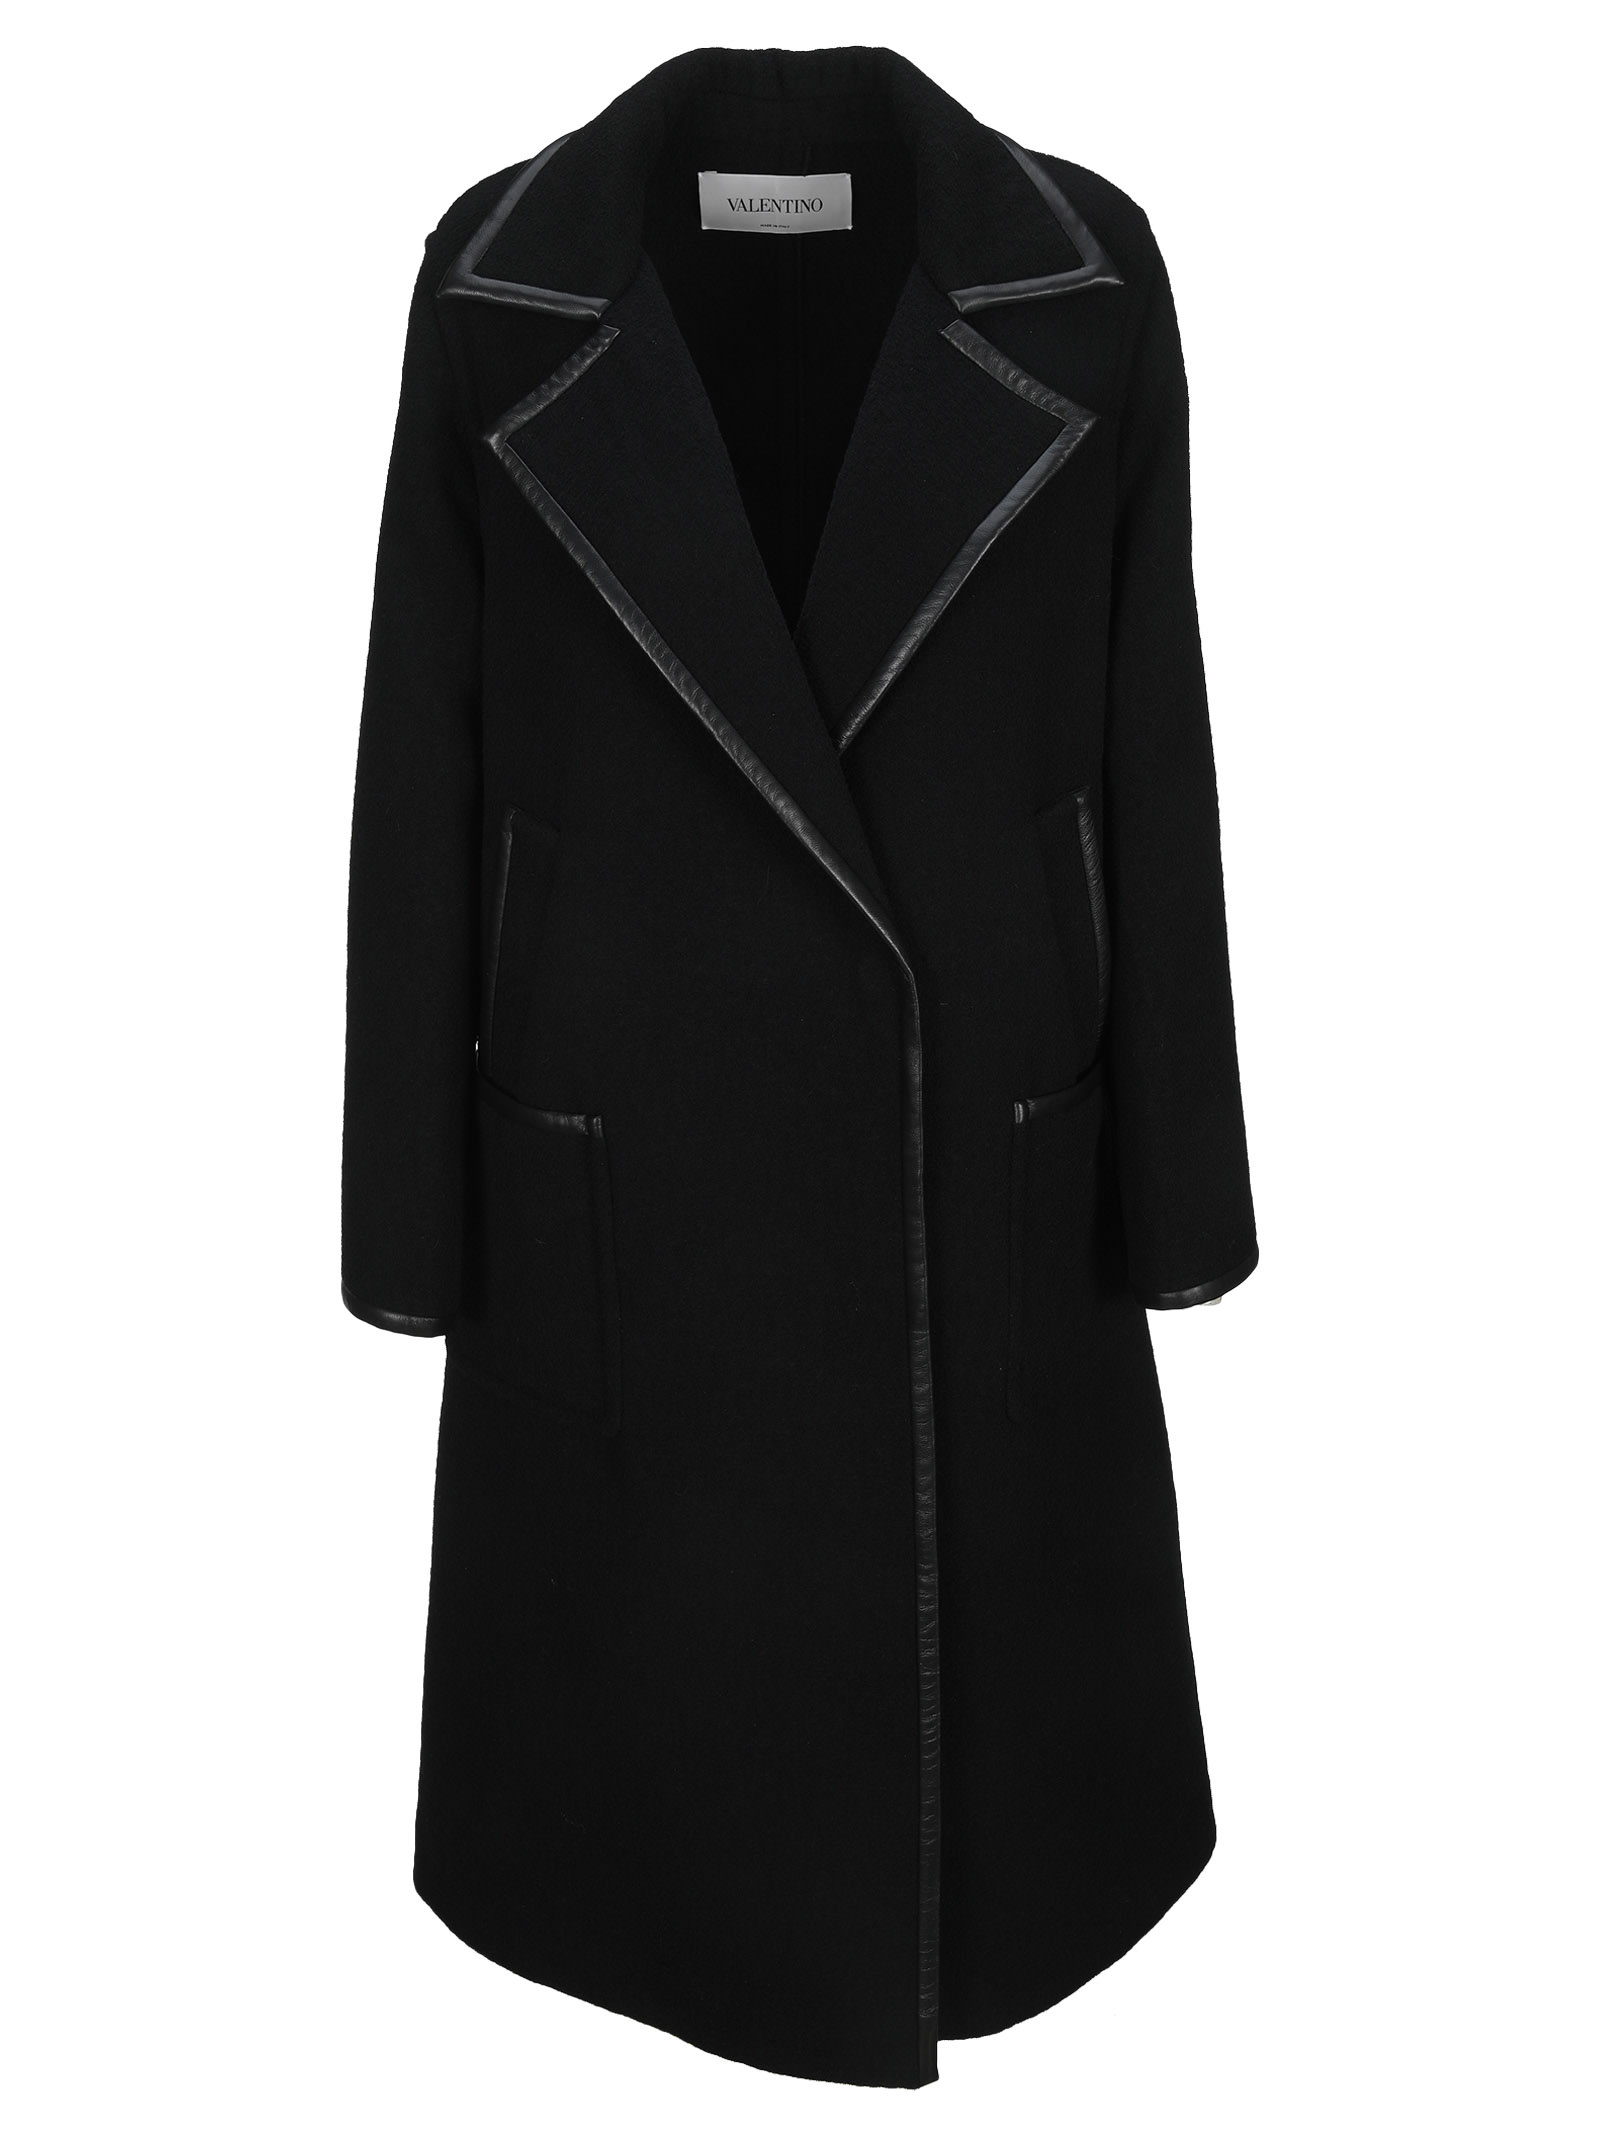 Valentino Black Coat With Leather Details